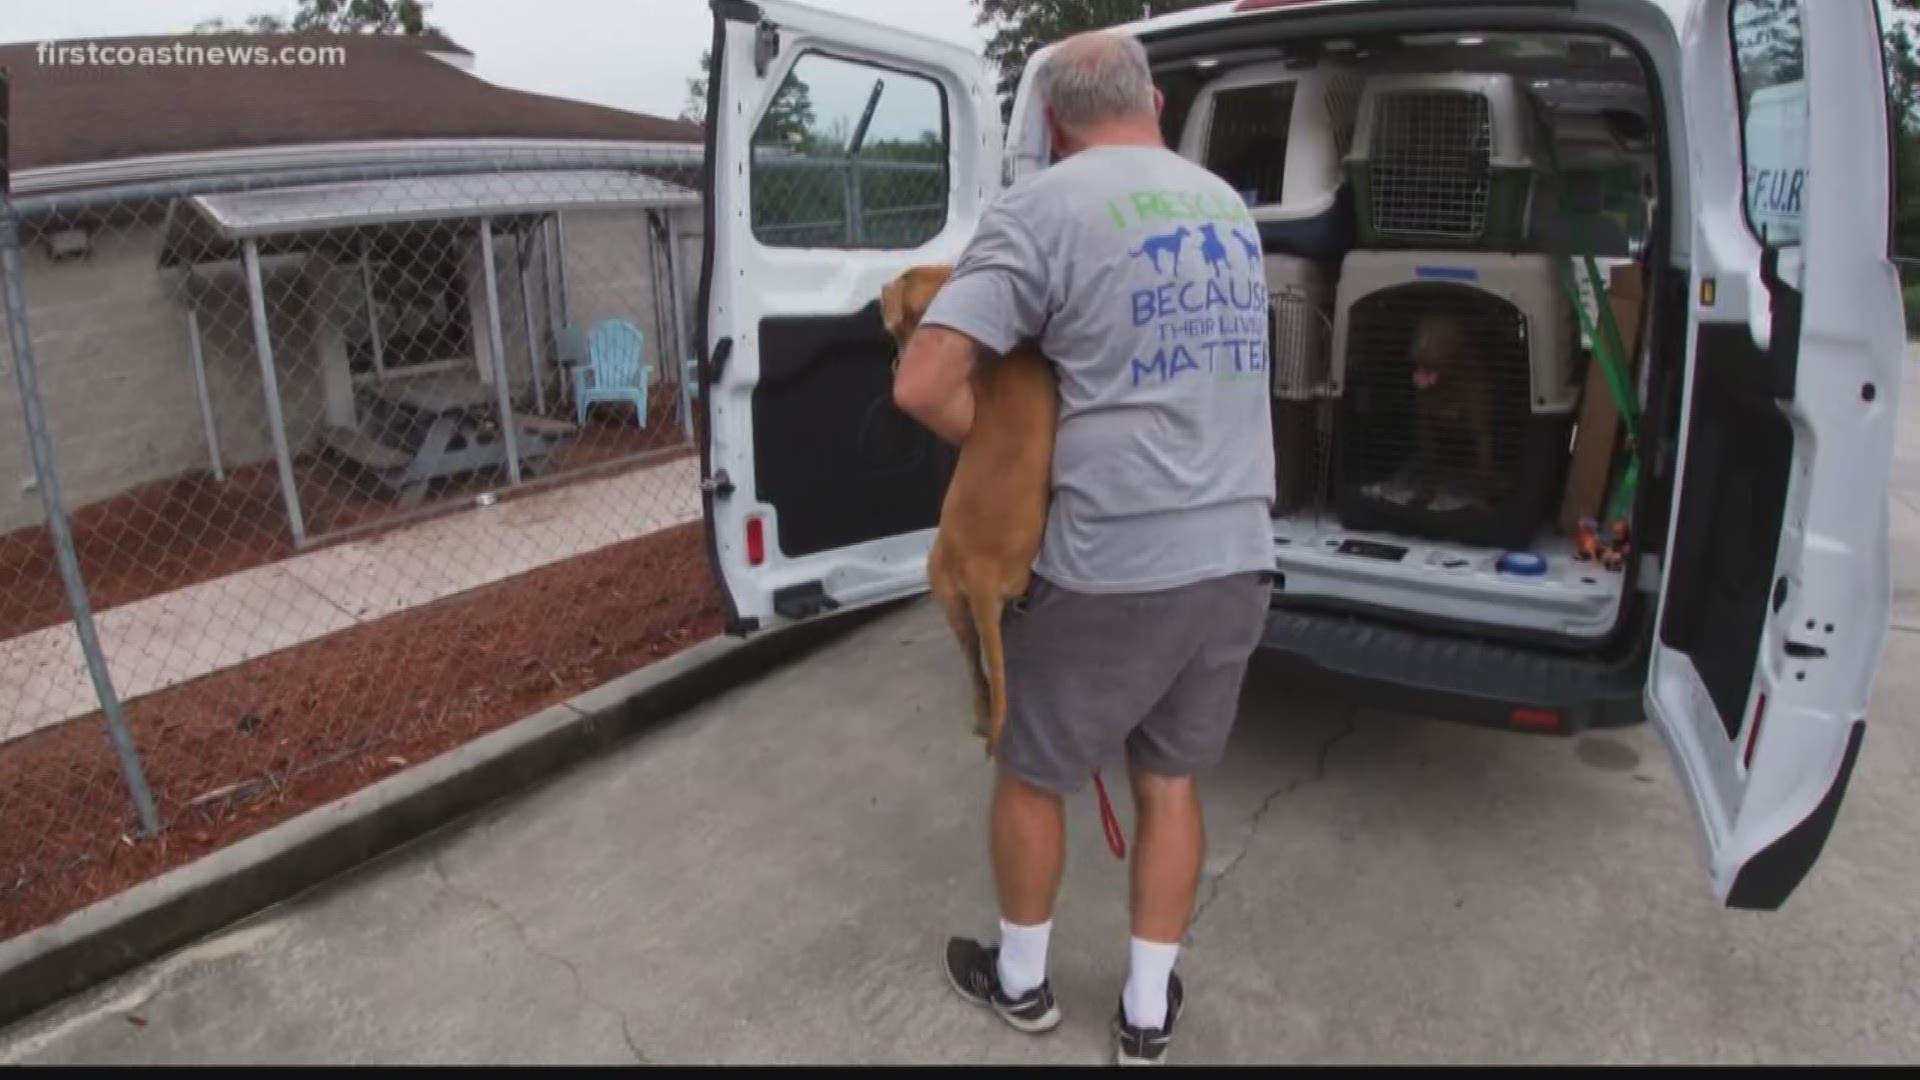 Nine dogs were transported 14 hours to a no-kill shelter ahead of Hurricane Dorian.